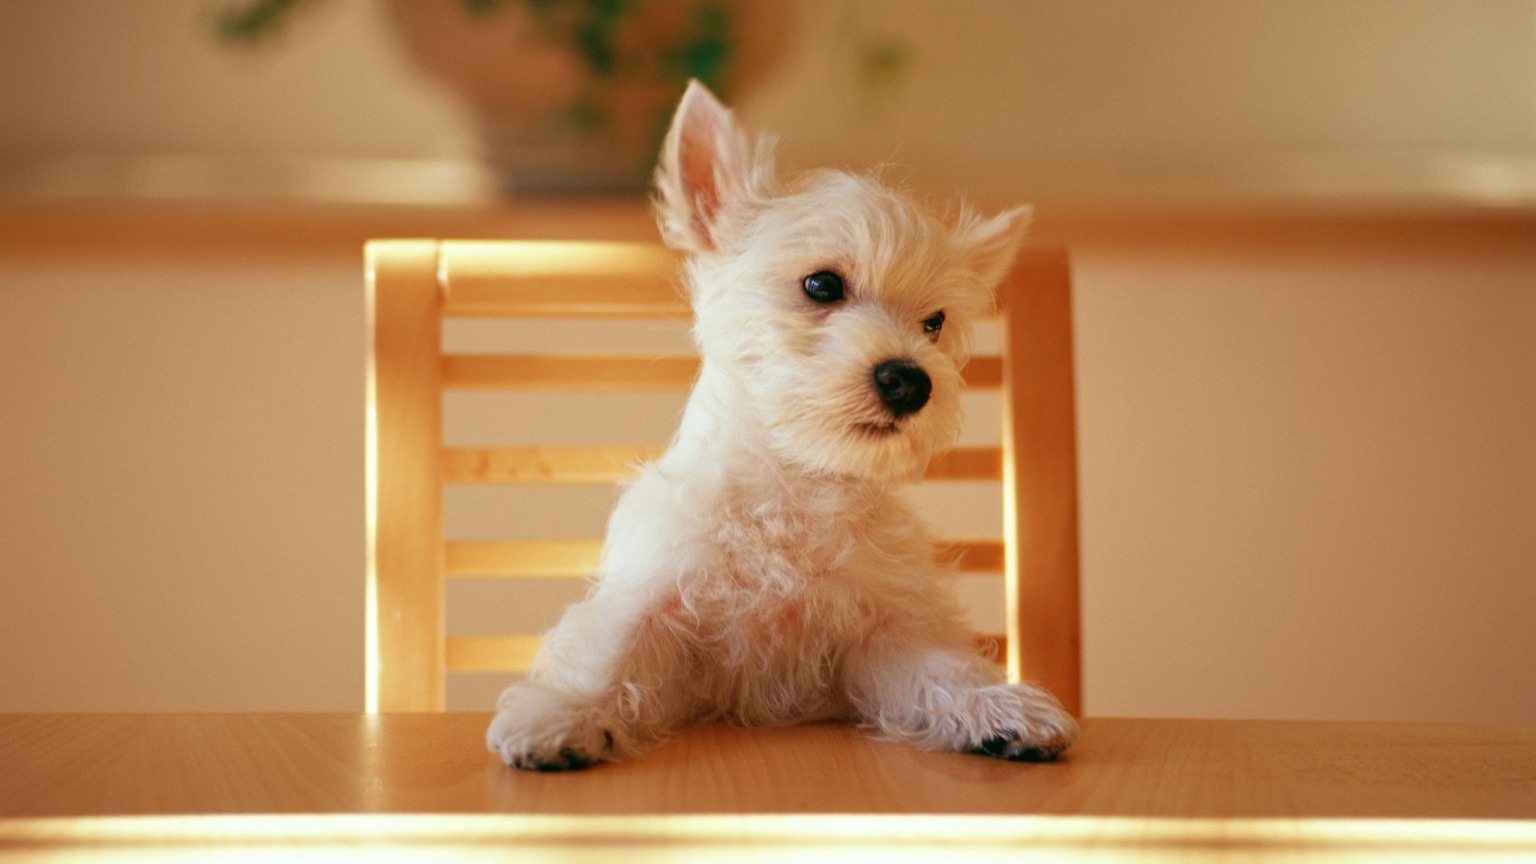 Dog at the table for 1536 x 864 HDTV resolution